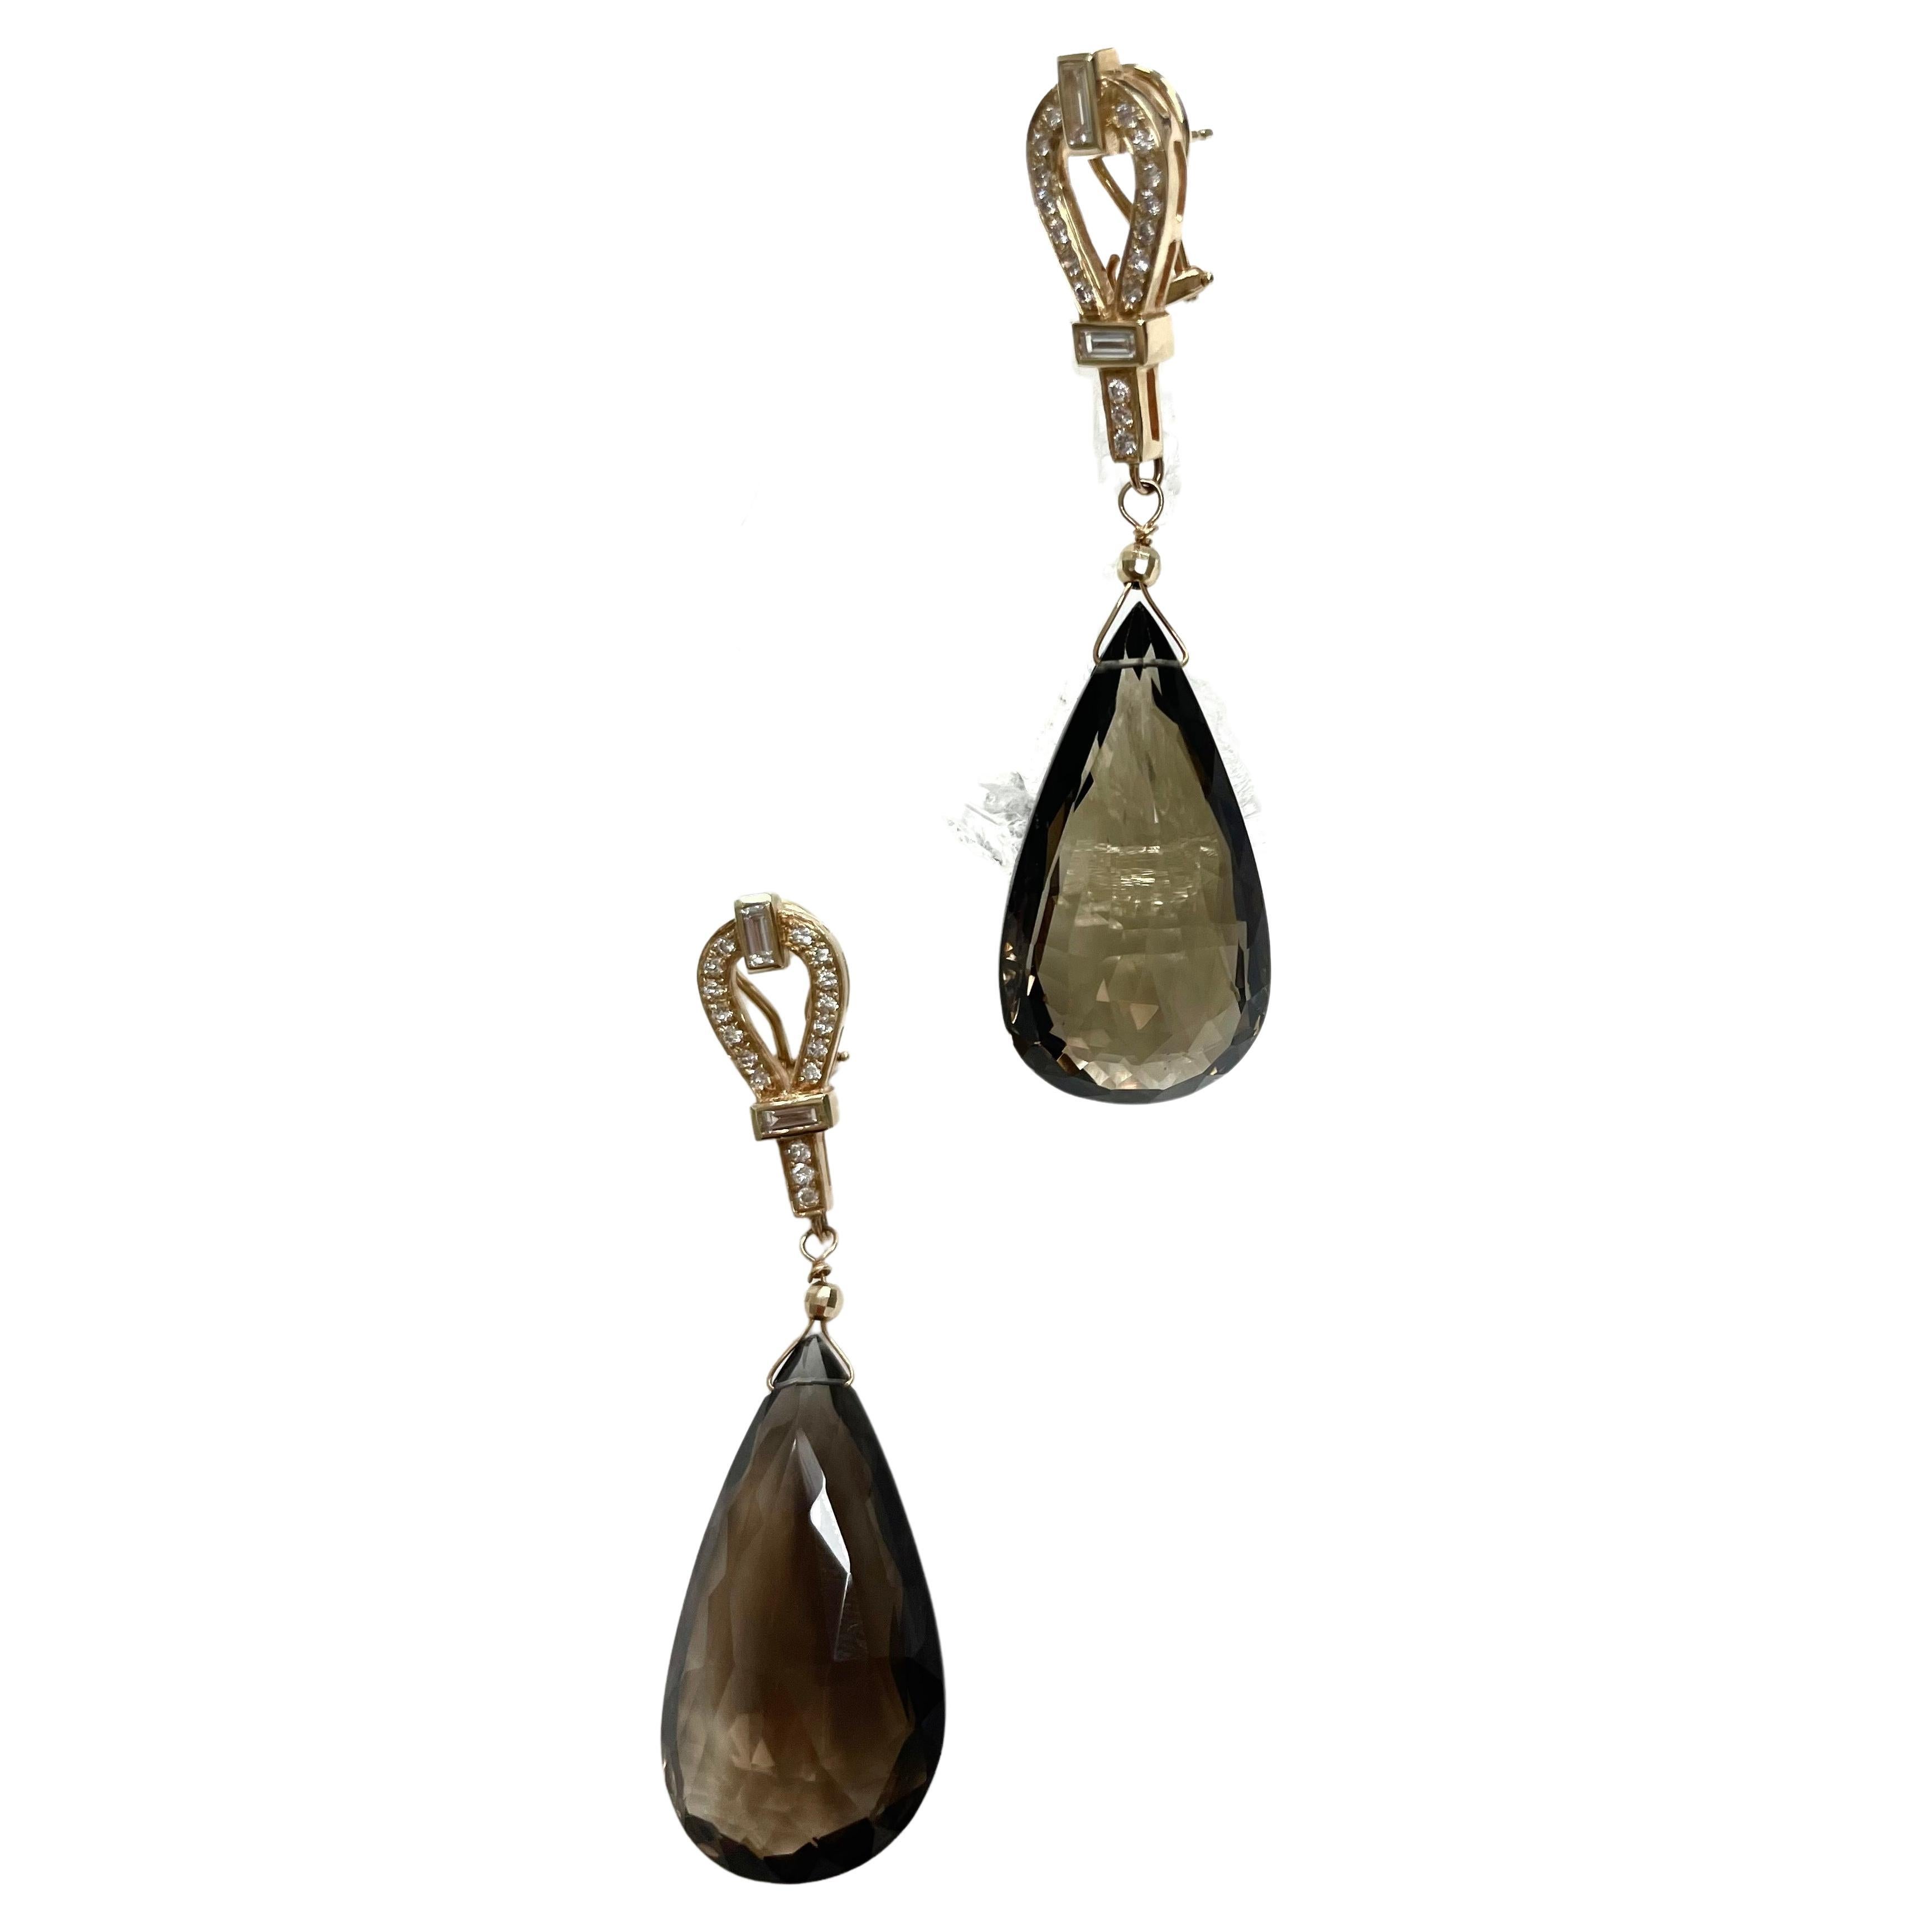 Description
Exquisite, dramatically large, faceted pear shape drops, suspended from an elegant 14k yellow gold pave and baguette diamonds omega back earrings.
Item # E3223
Check out matching necklace (see photo), Item # N3759

Materials and